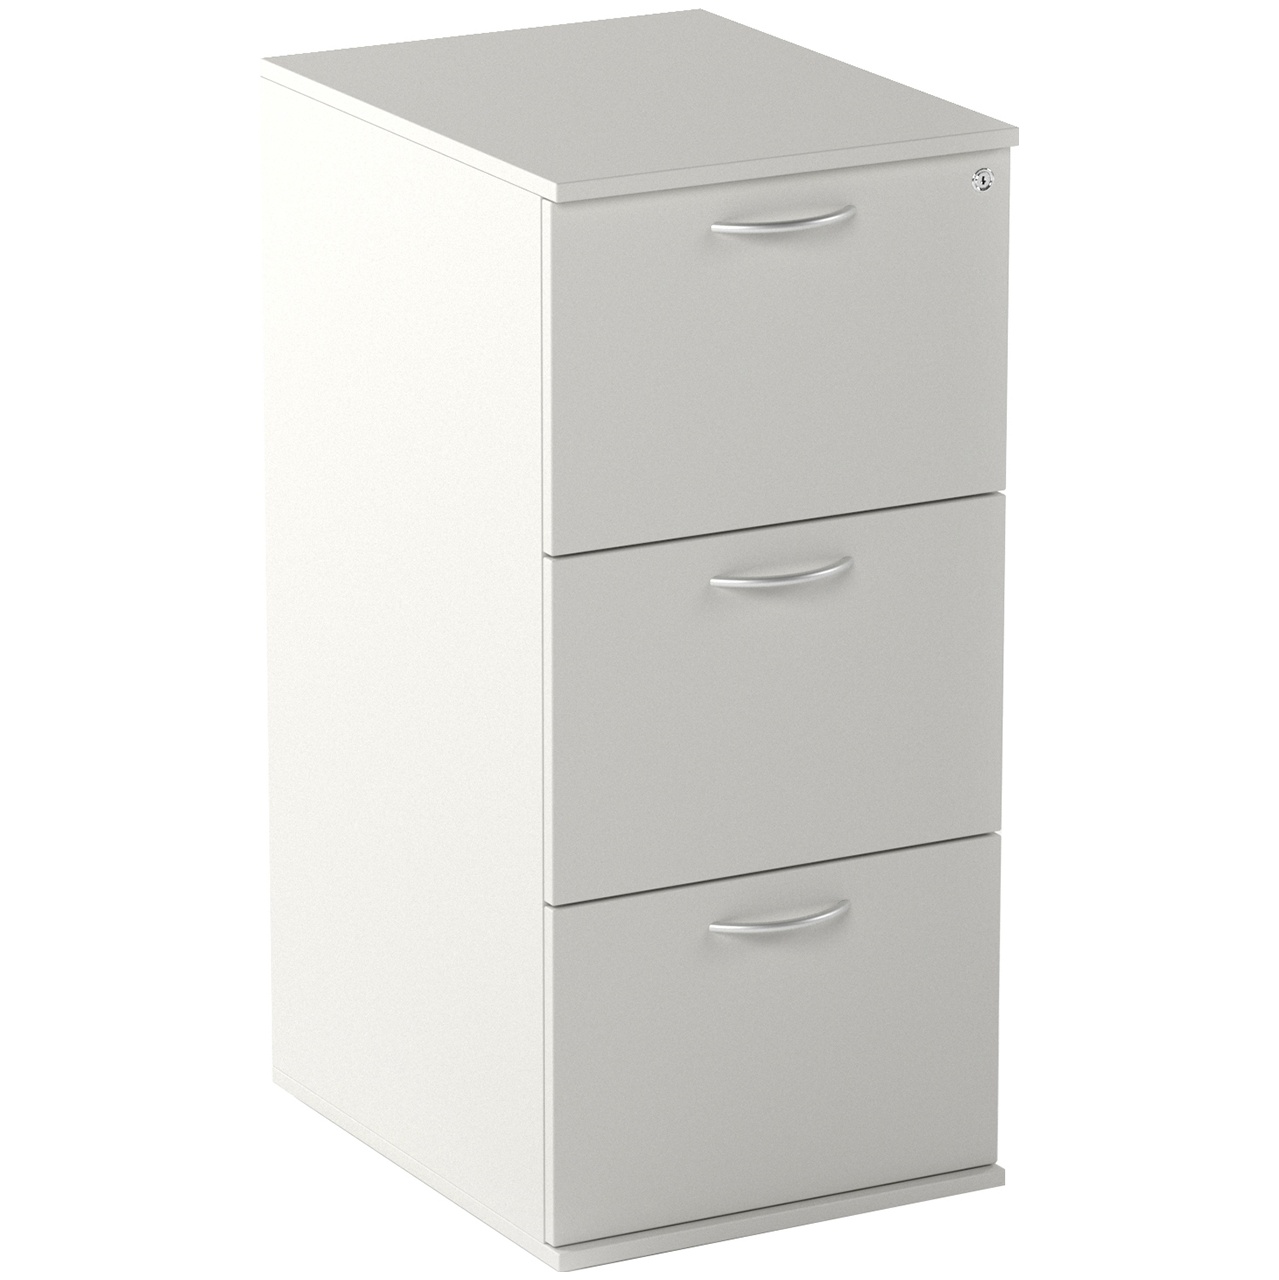 Vogue Essential White Filing Cabinets Wooden Filing Cabinets